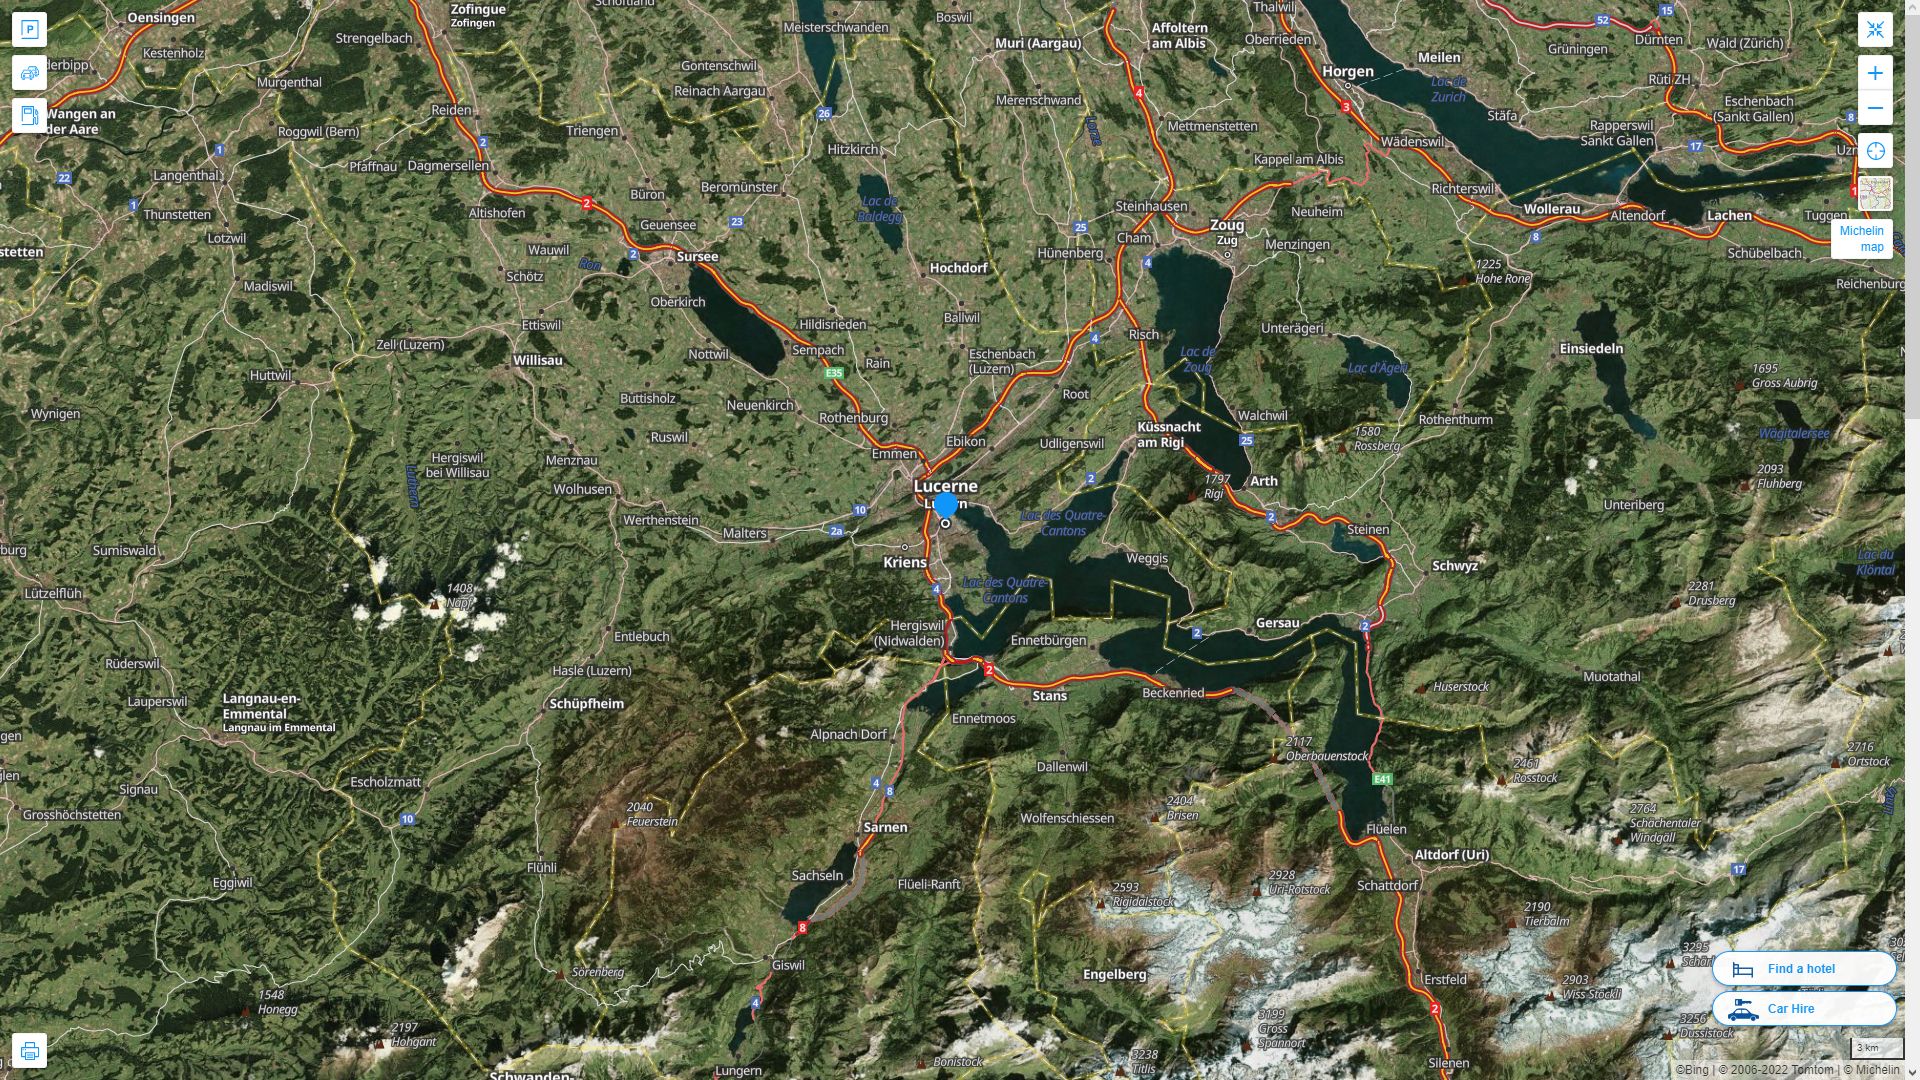 Lucerne Highway and Road Map with Satellite View